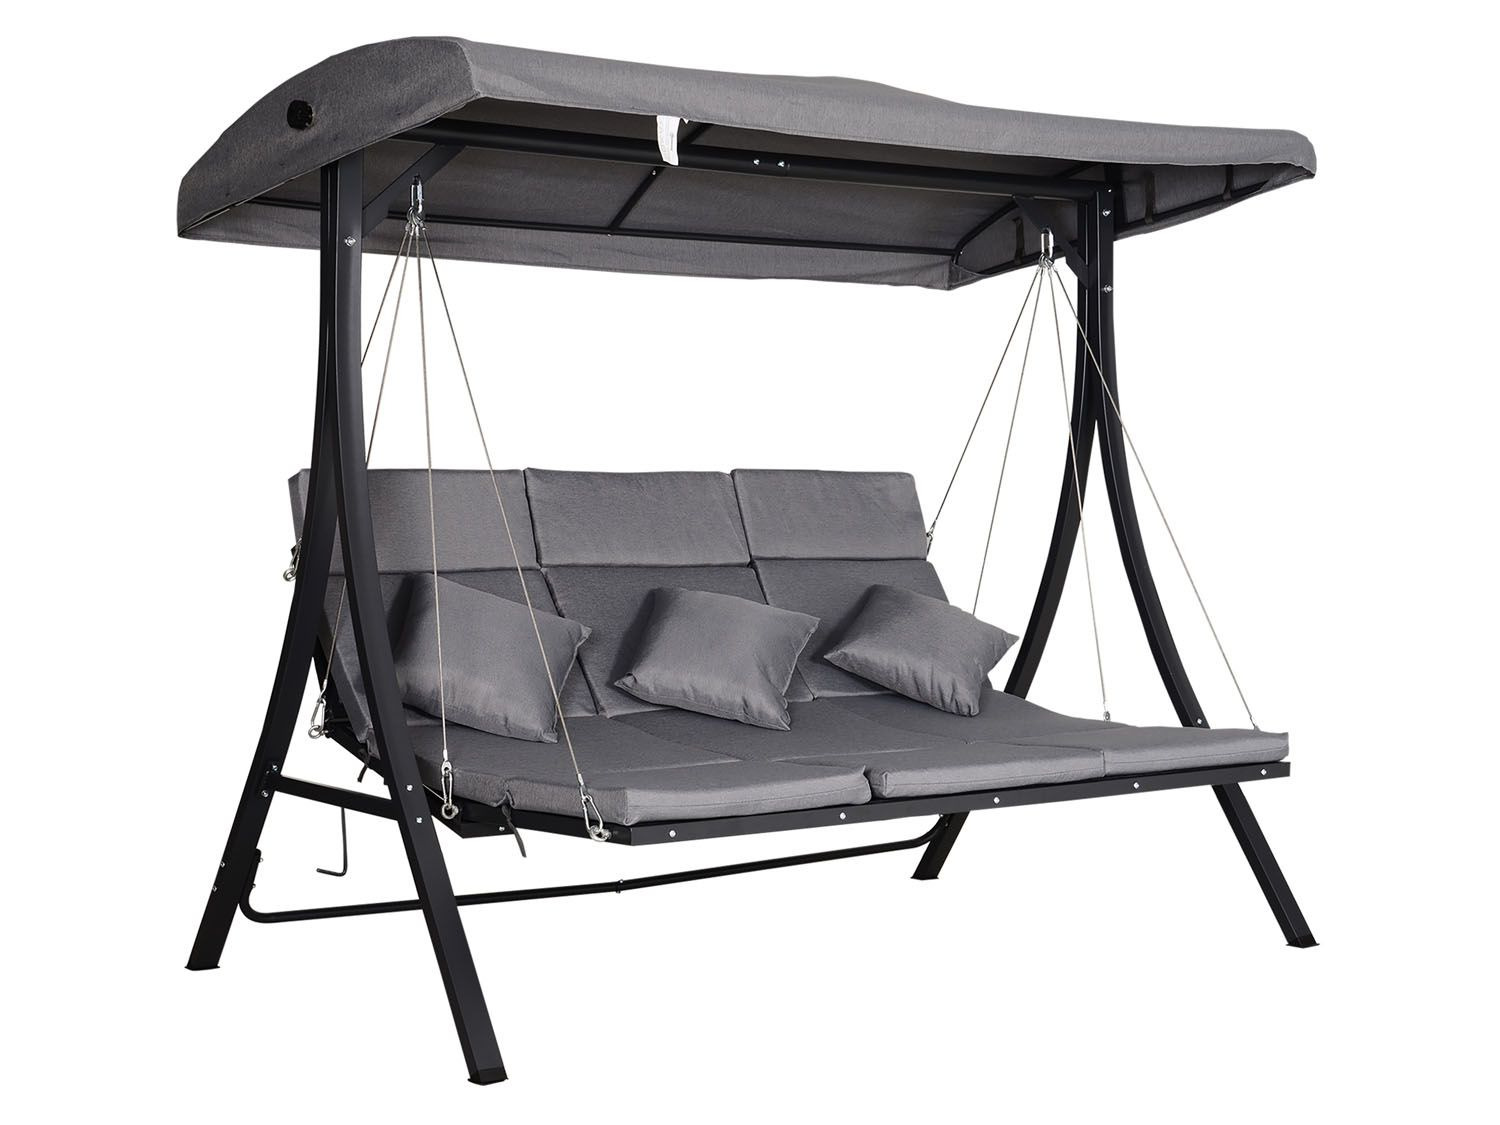 Outsunny Hollywoodschaukel Lounge, | LIDL 3-Sitzer